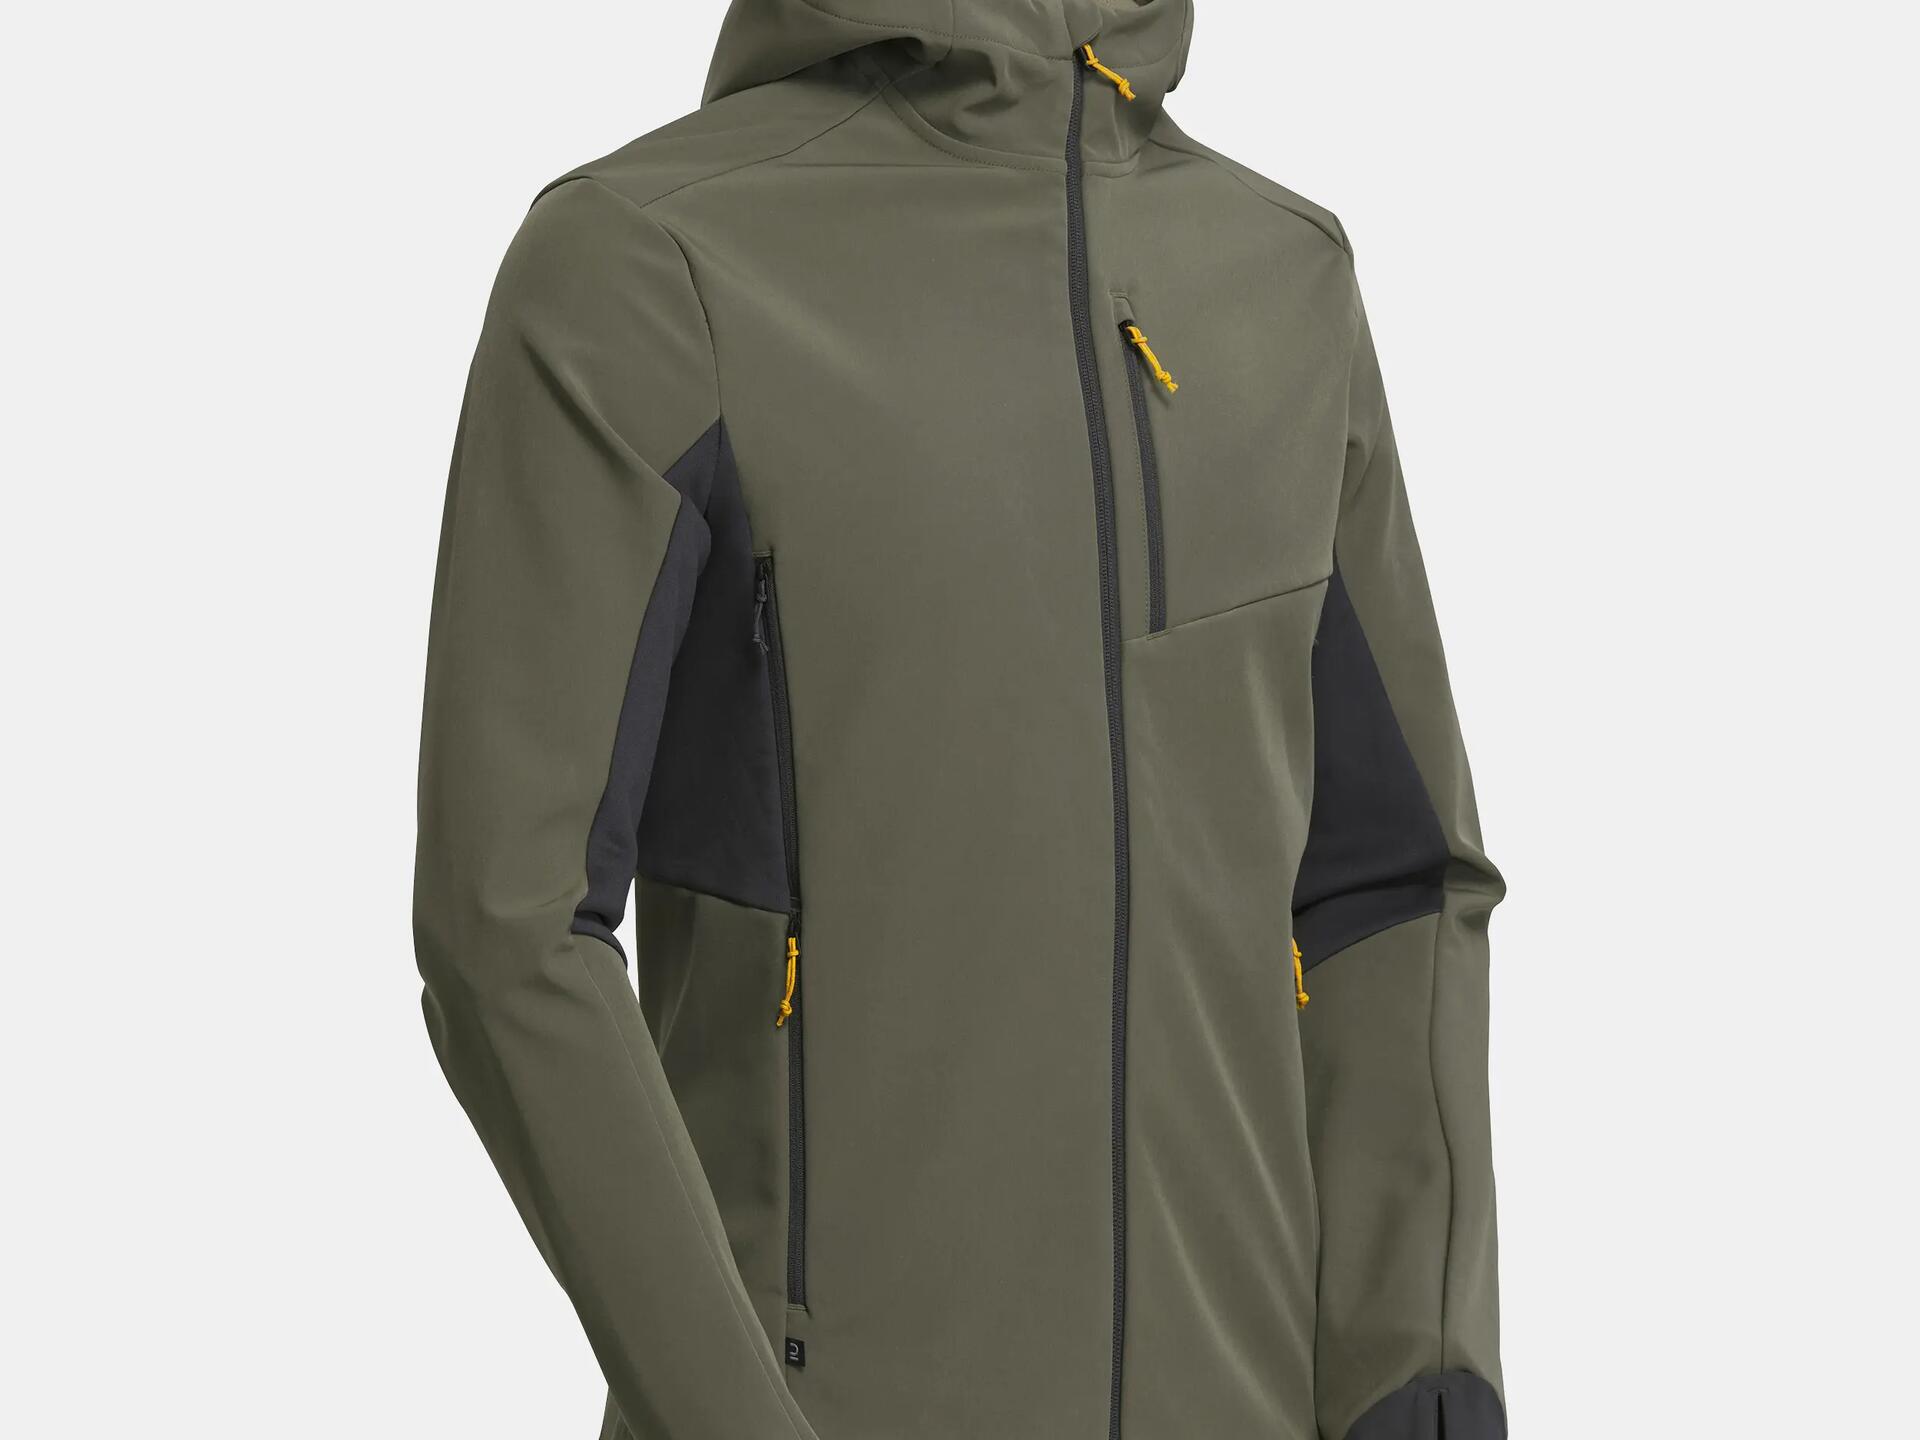 Different types of softshell choosing a softshell jacket?